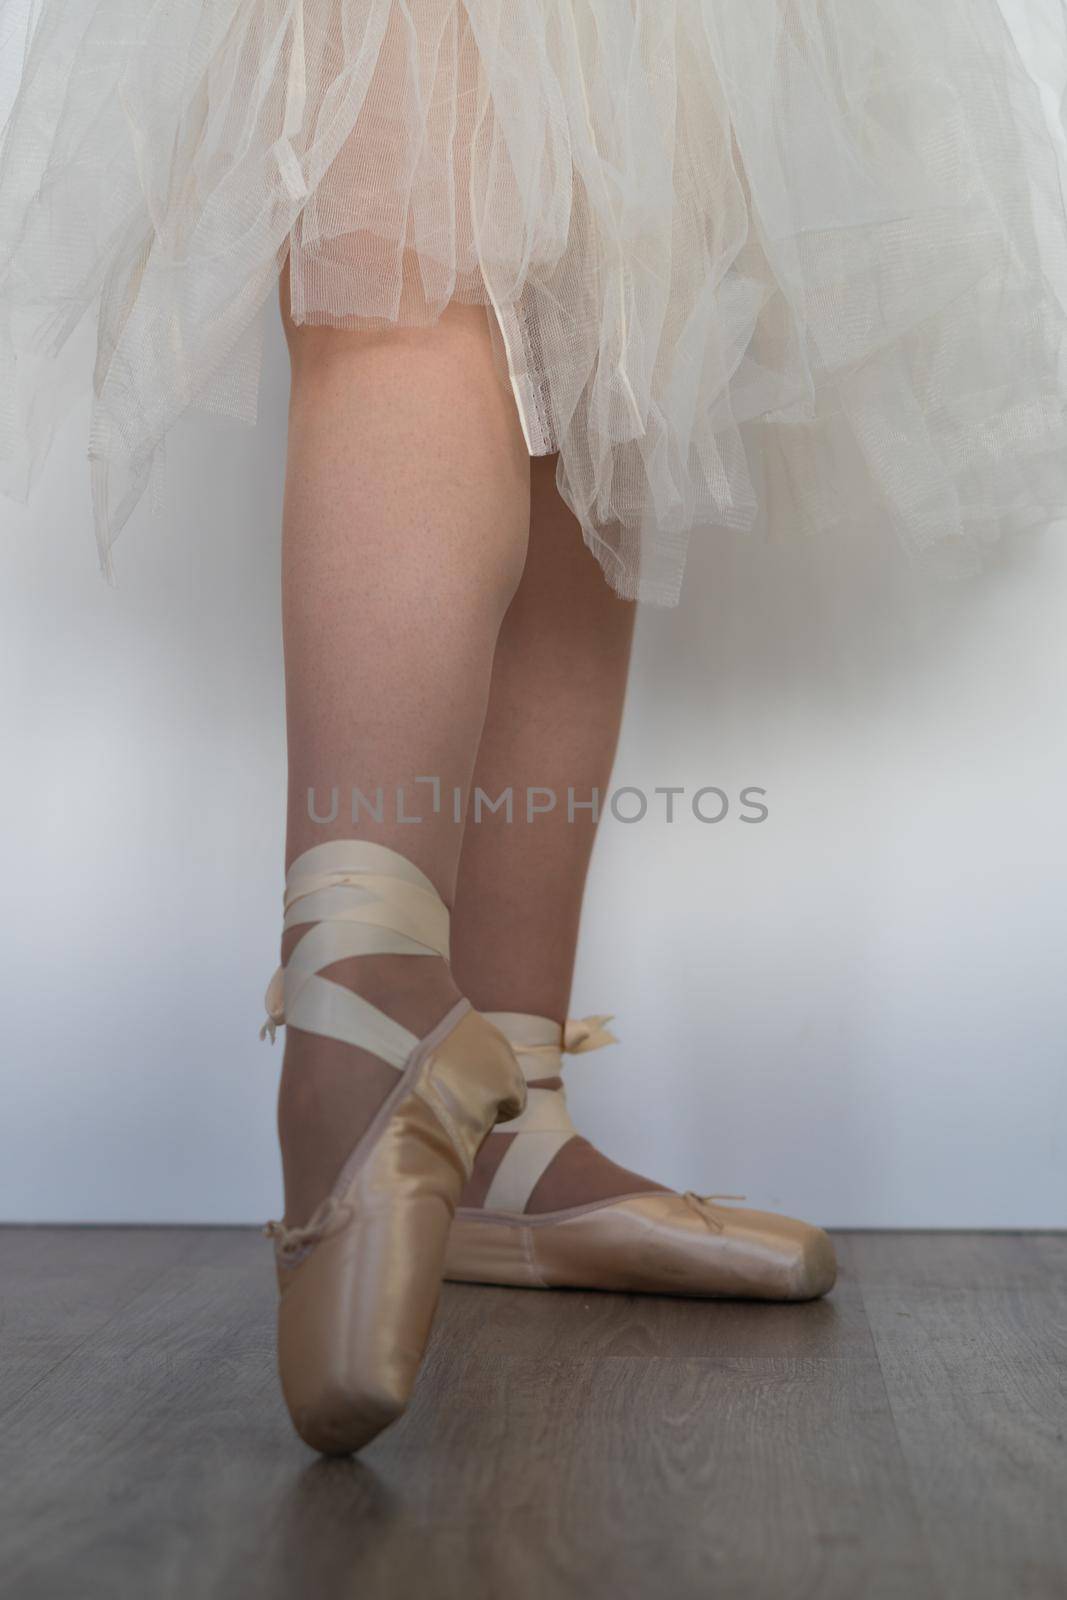 legs of girl dancing ballet with tulle skirt and pink shoes different dance steps wooden floor and white background with copy space